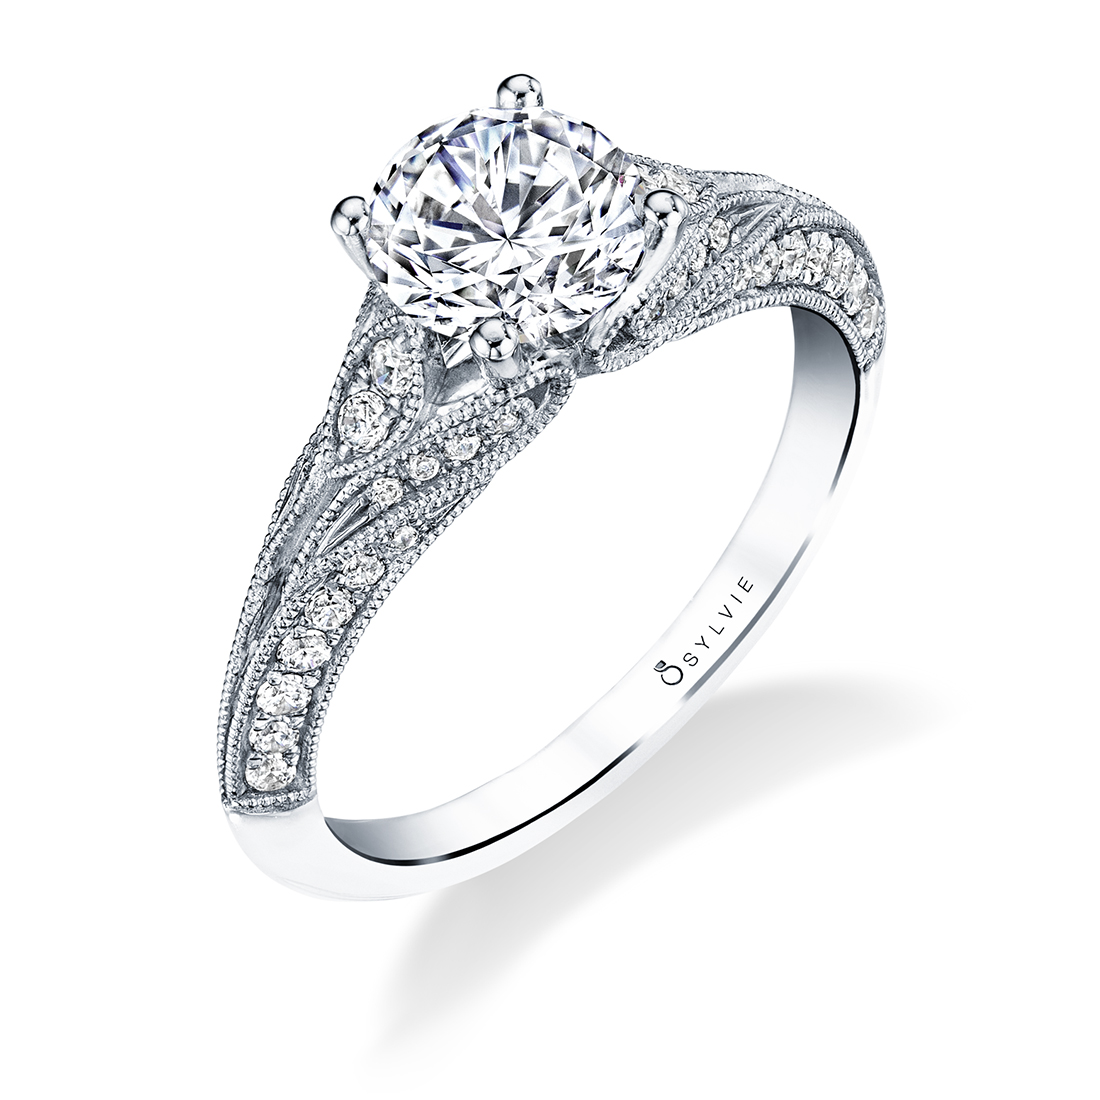 Antique Inspired Engagement Ring in White Gold - Livia